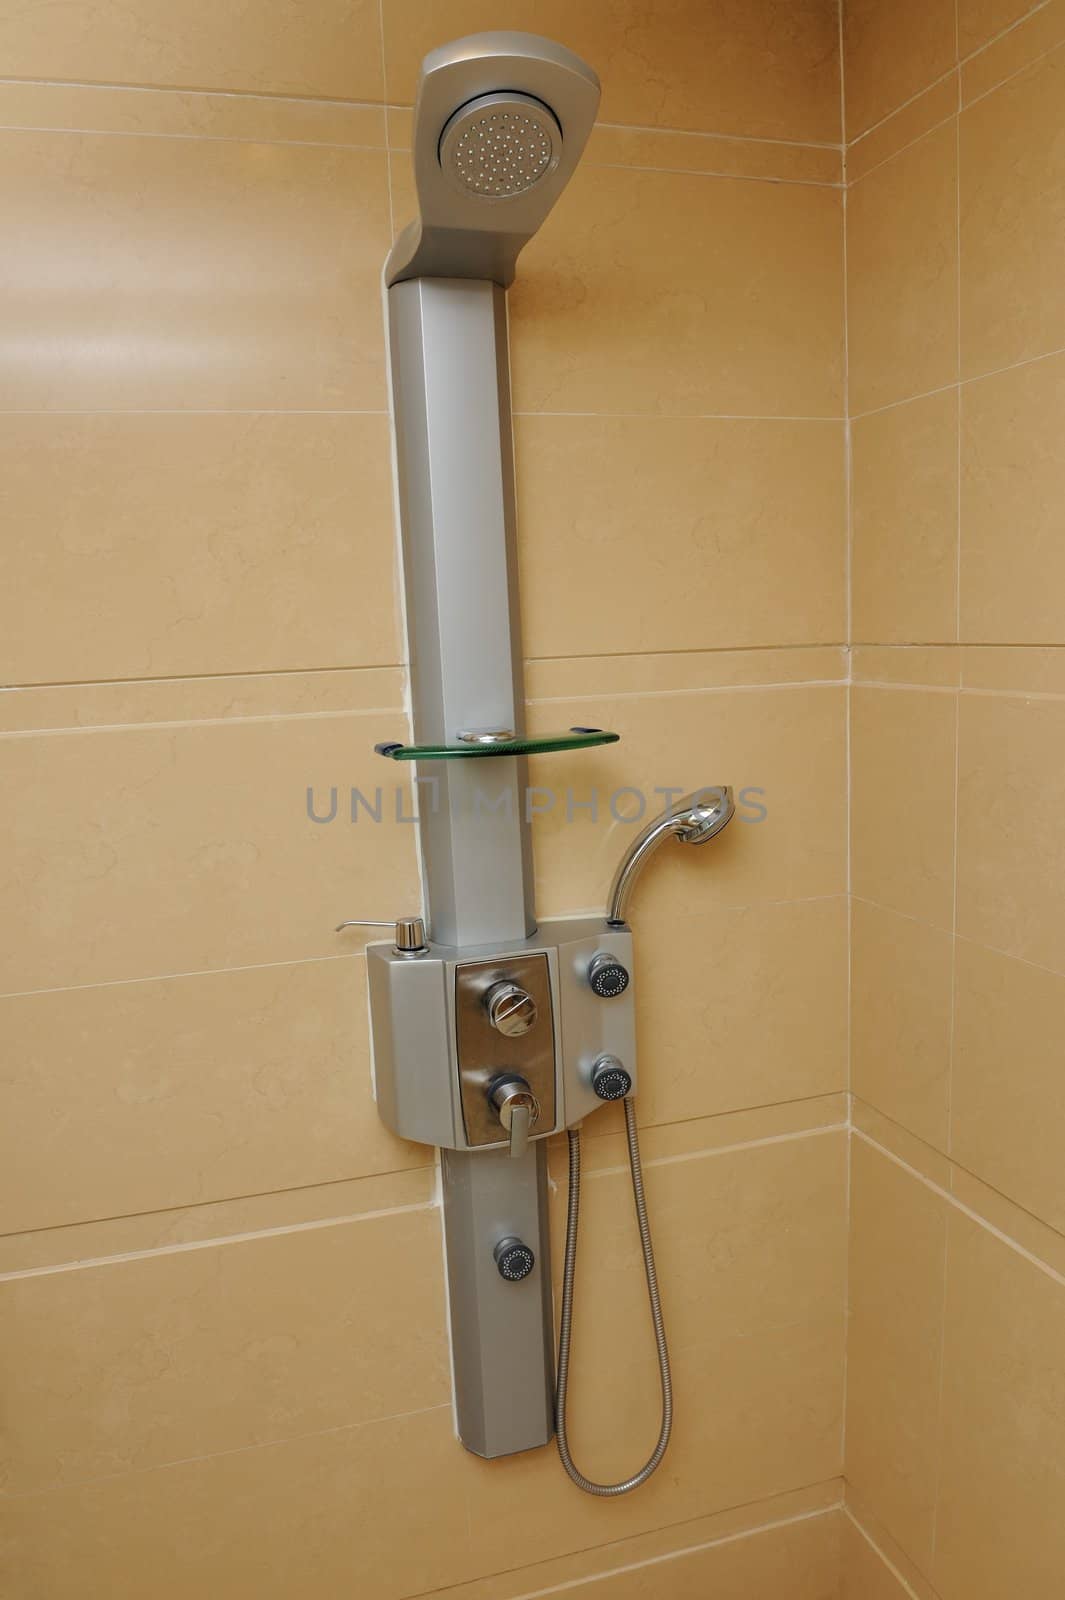 Shower head in the bathroom